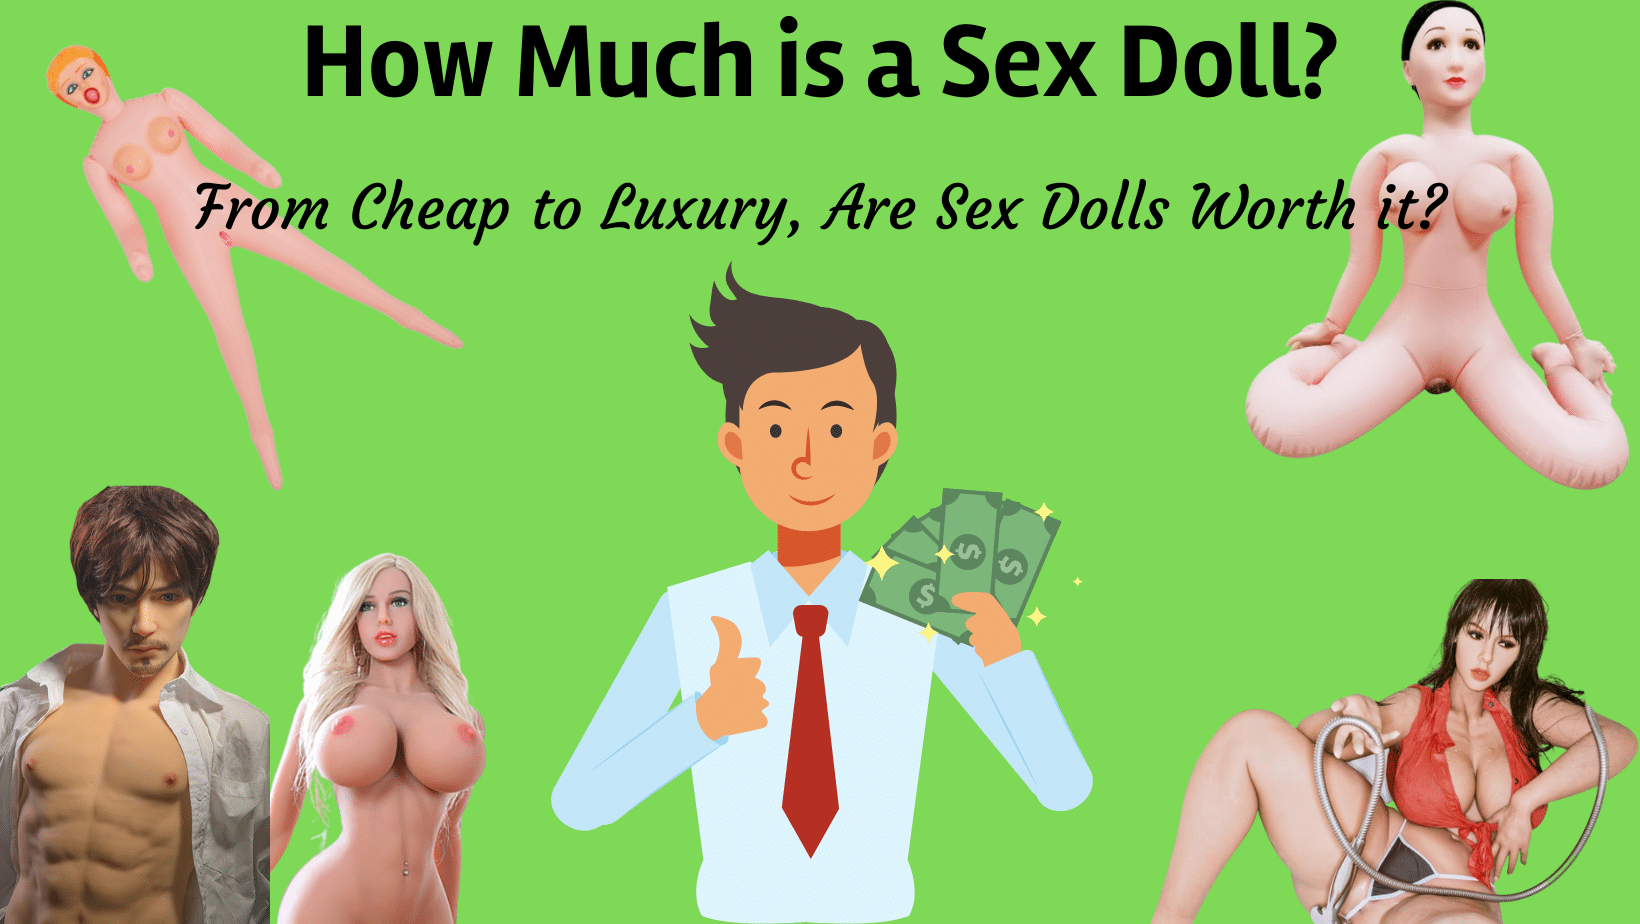 How Much is a Sex Doll? From Cheap to Luxury, Are Sex Dolls Worth It?